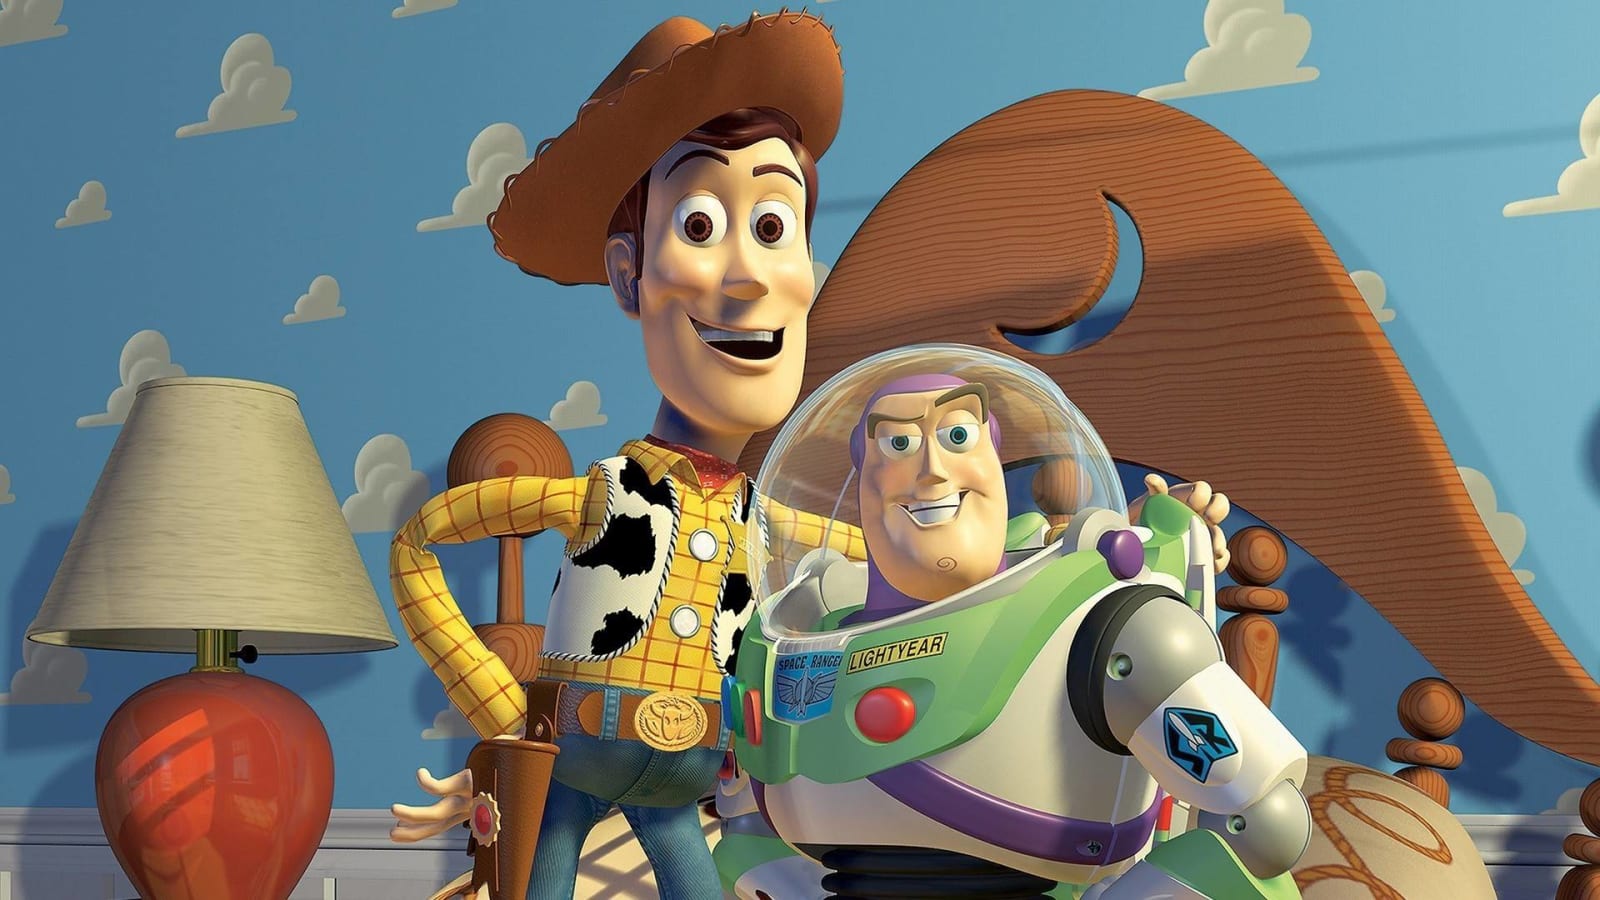 The 28 best animated movie franchises of all time